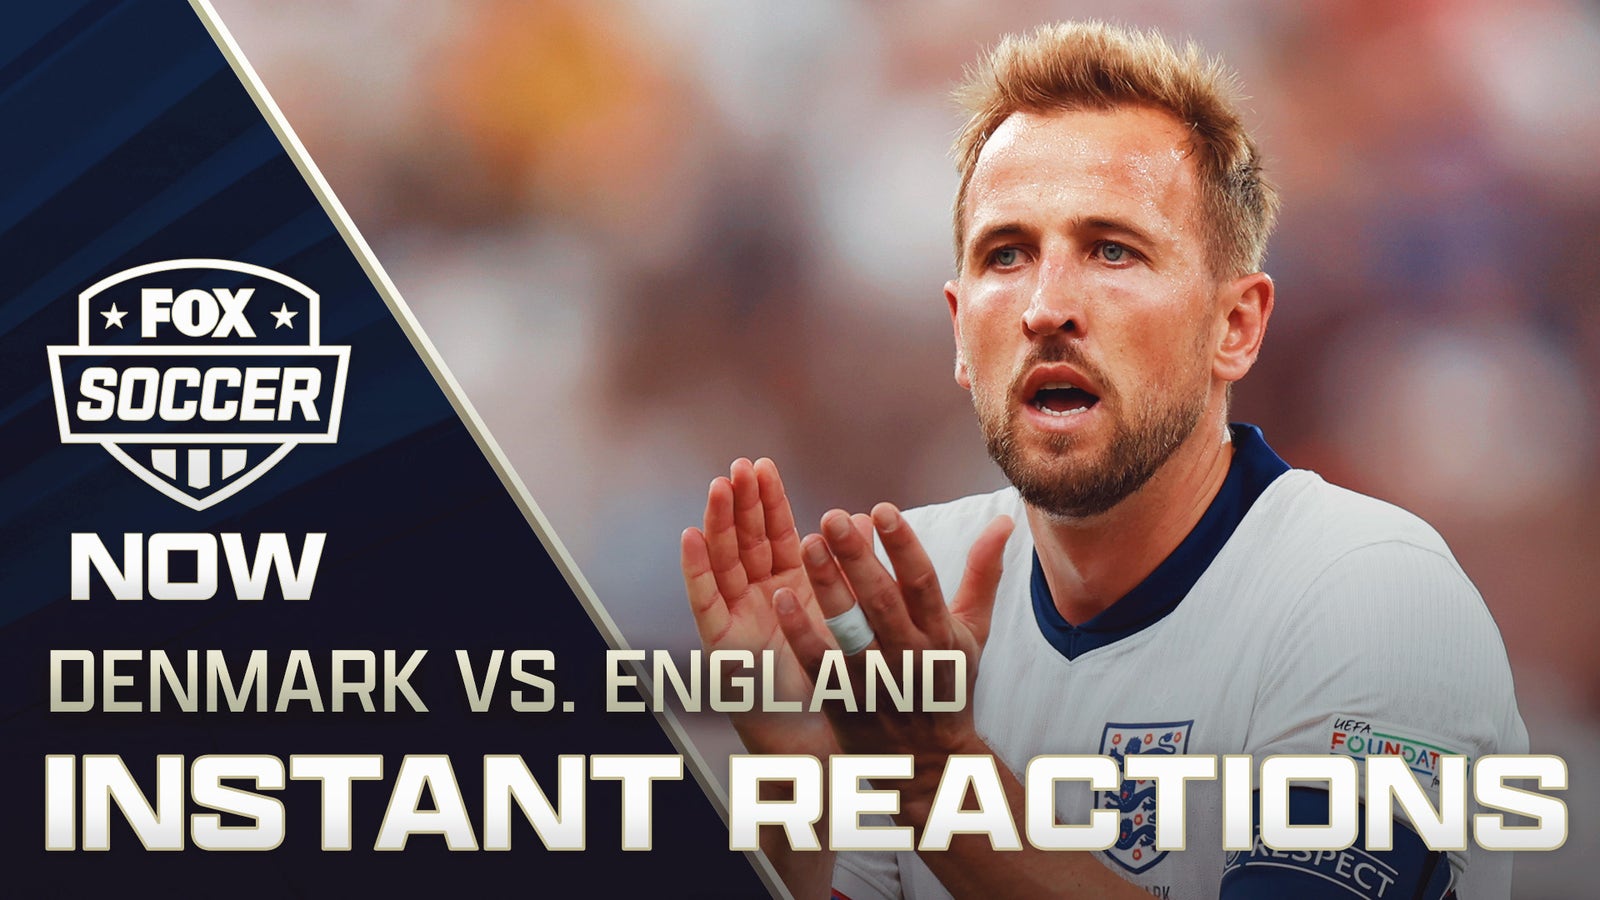 Denmark vs. England Reaction: Is it coming home?